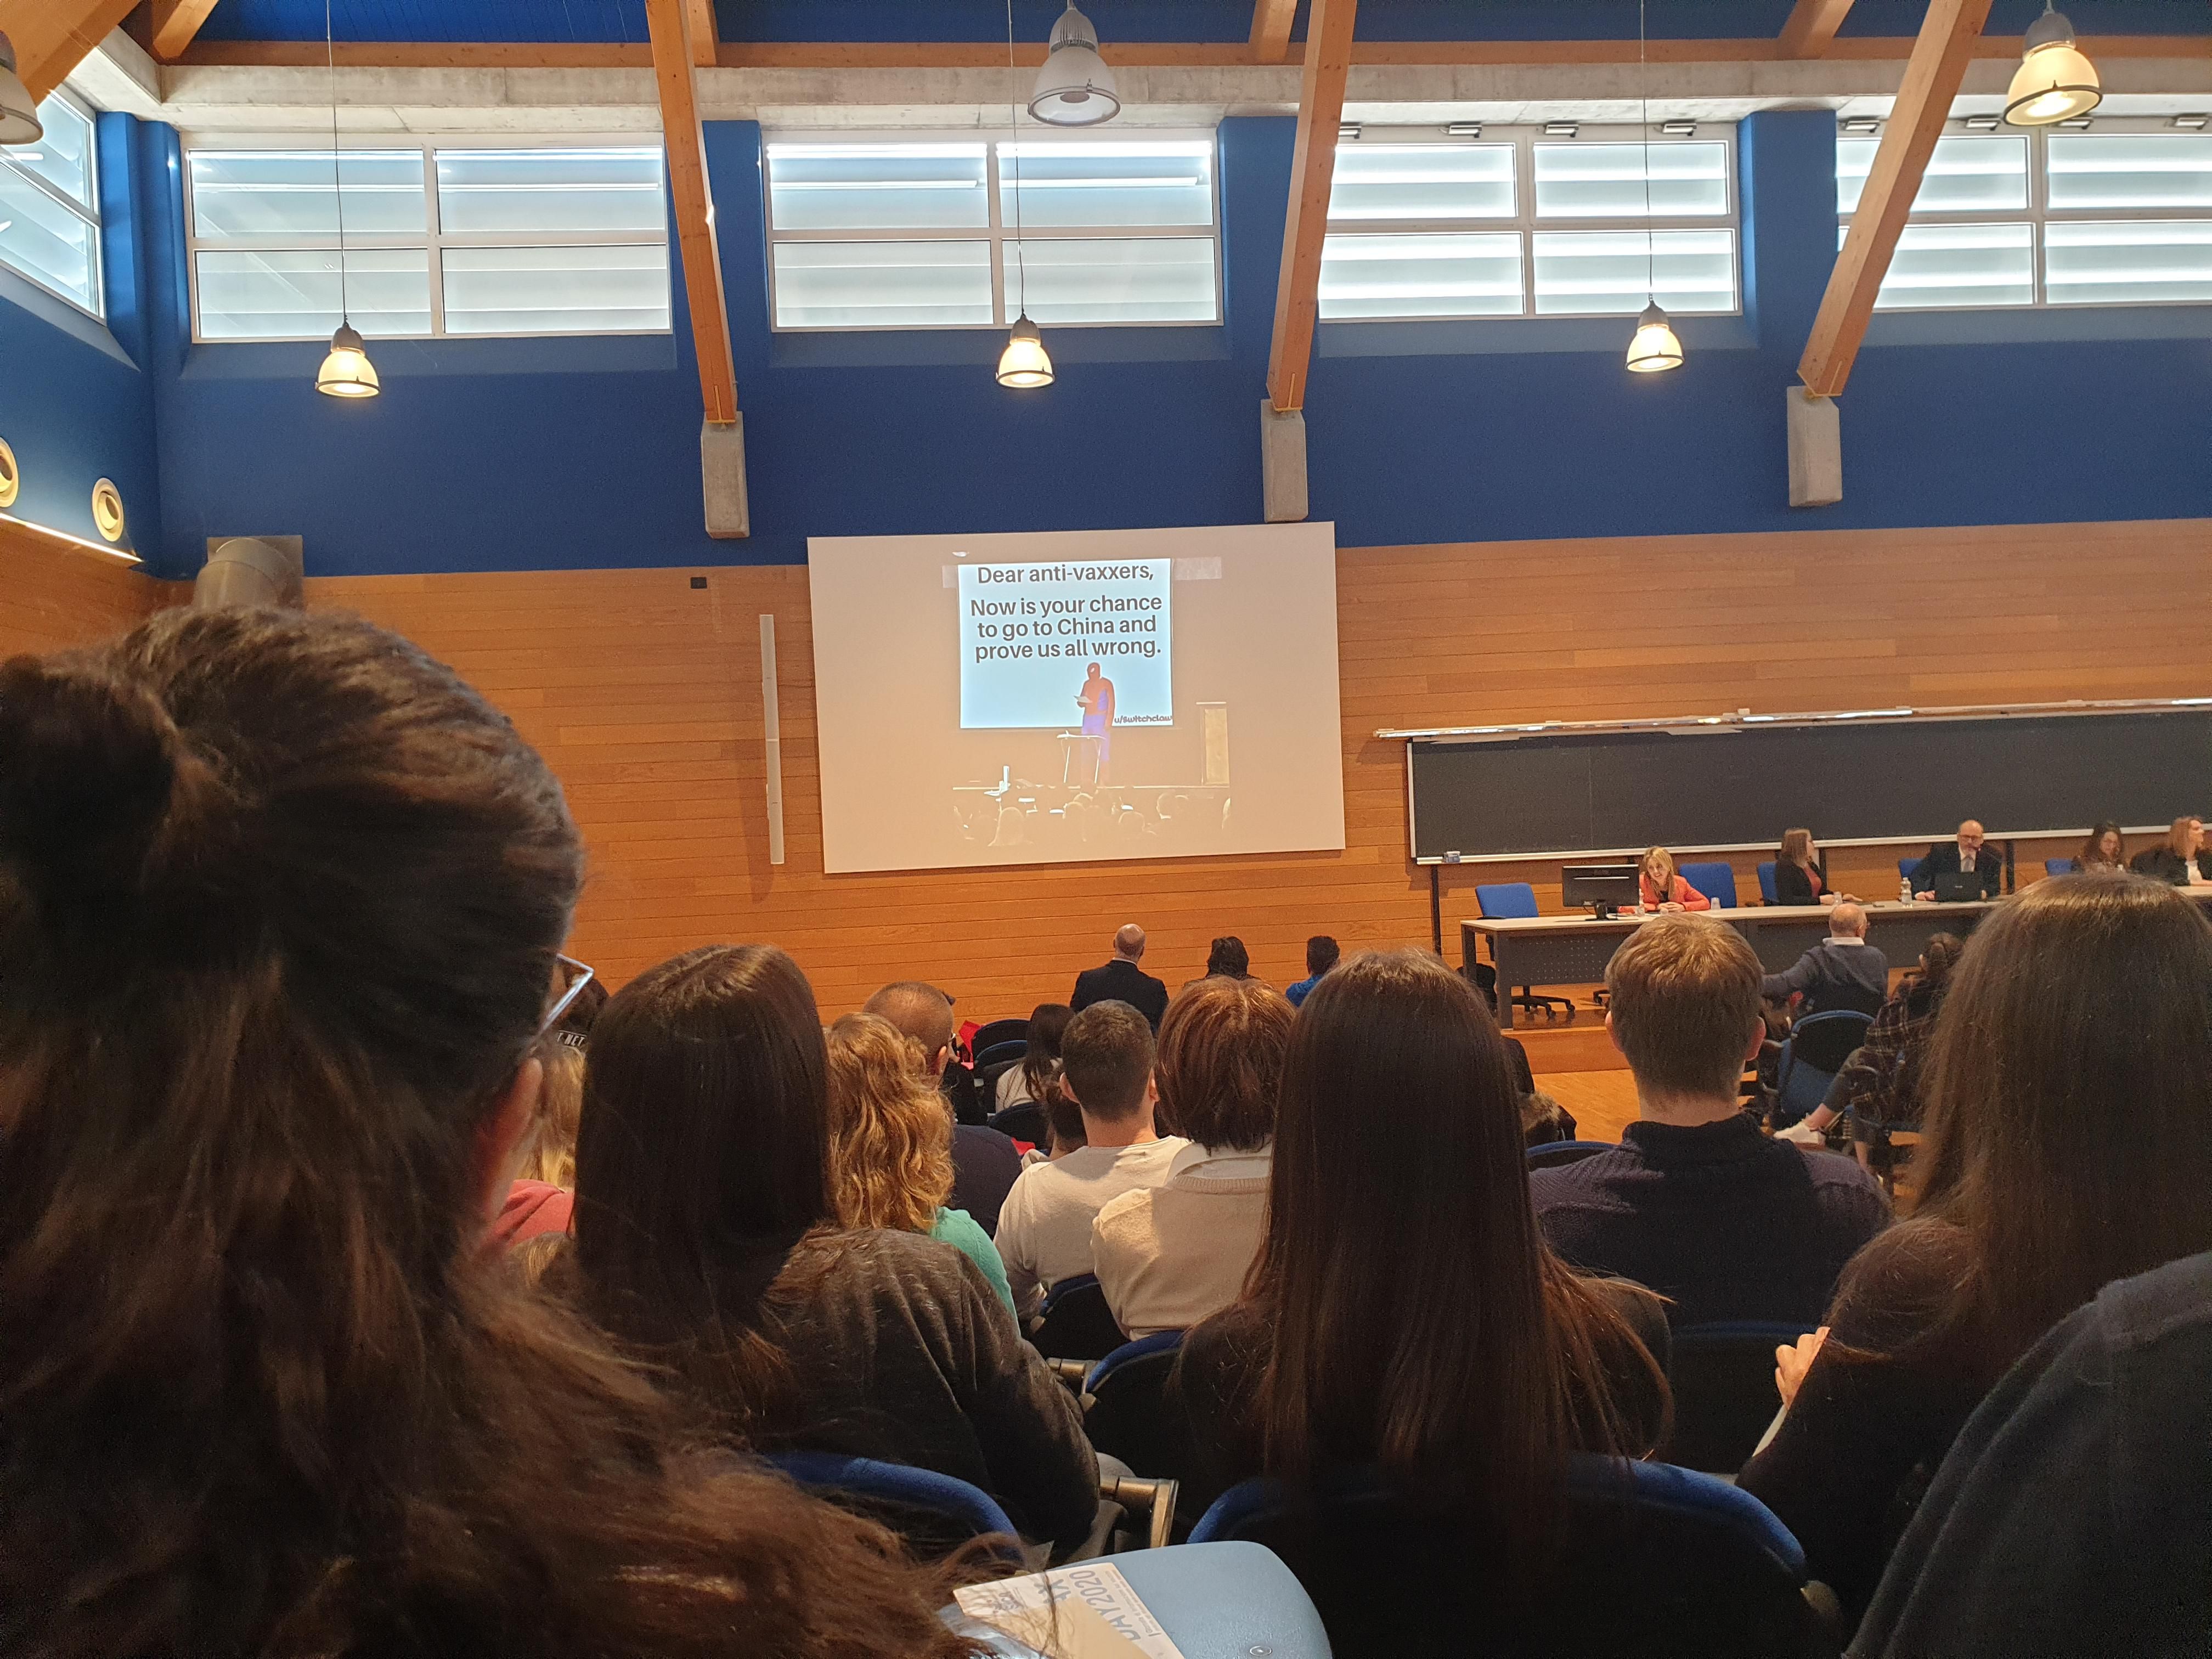 Today's conference in a local university on why antivaxxers are wrong